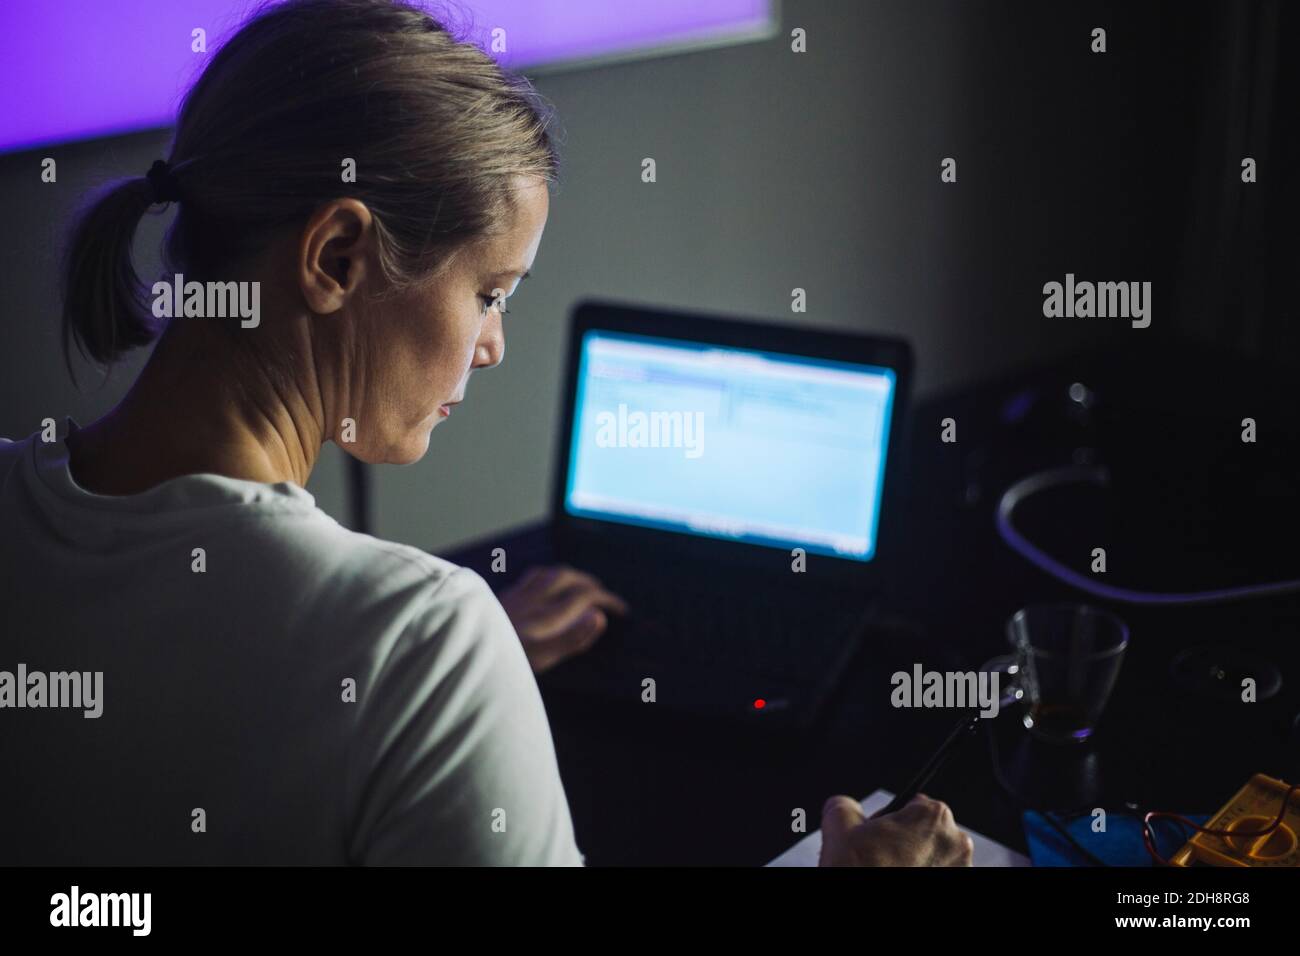 Female IT professional writing while working on laptop in creative office Stock Photo